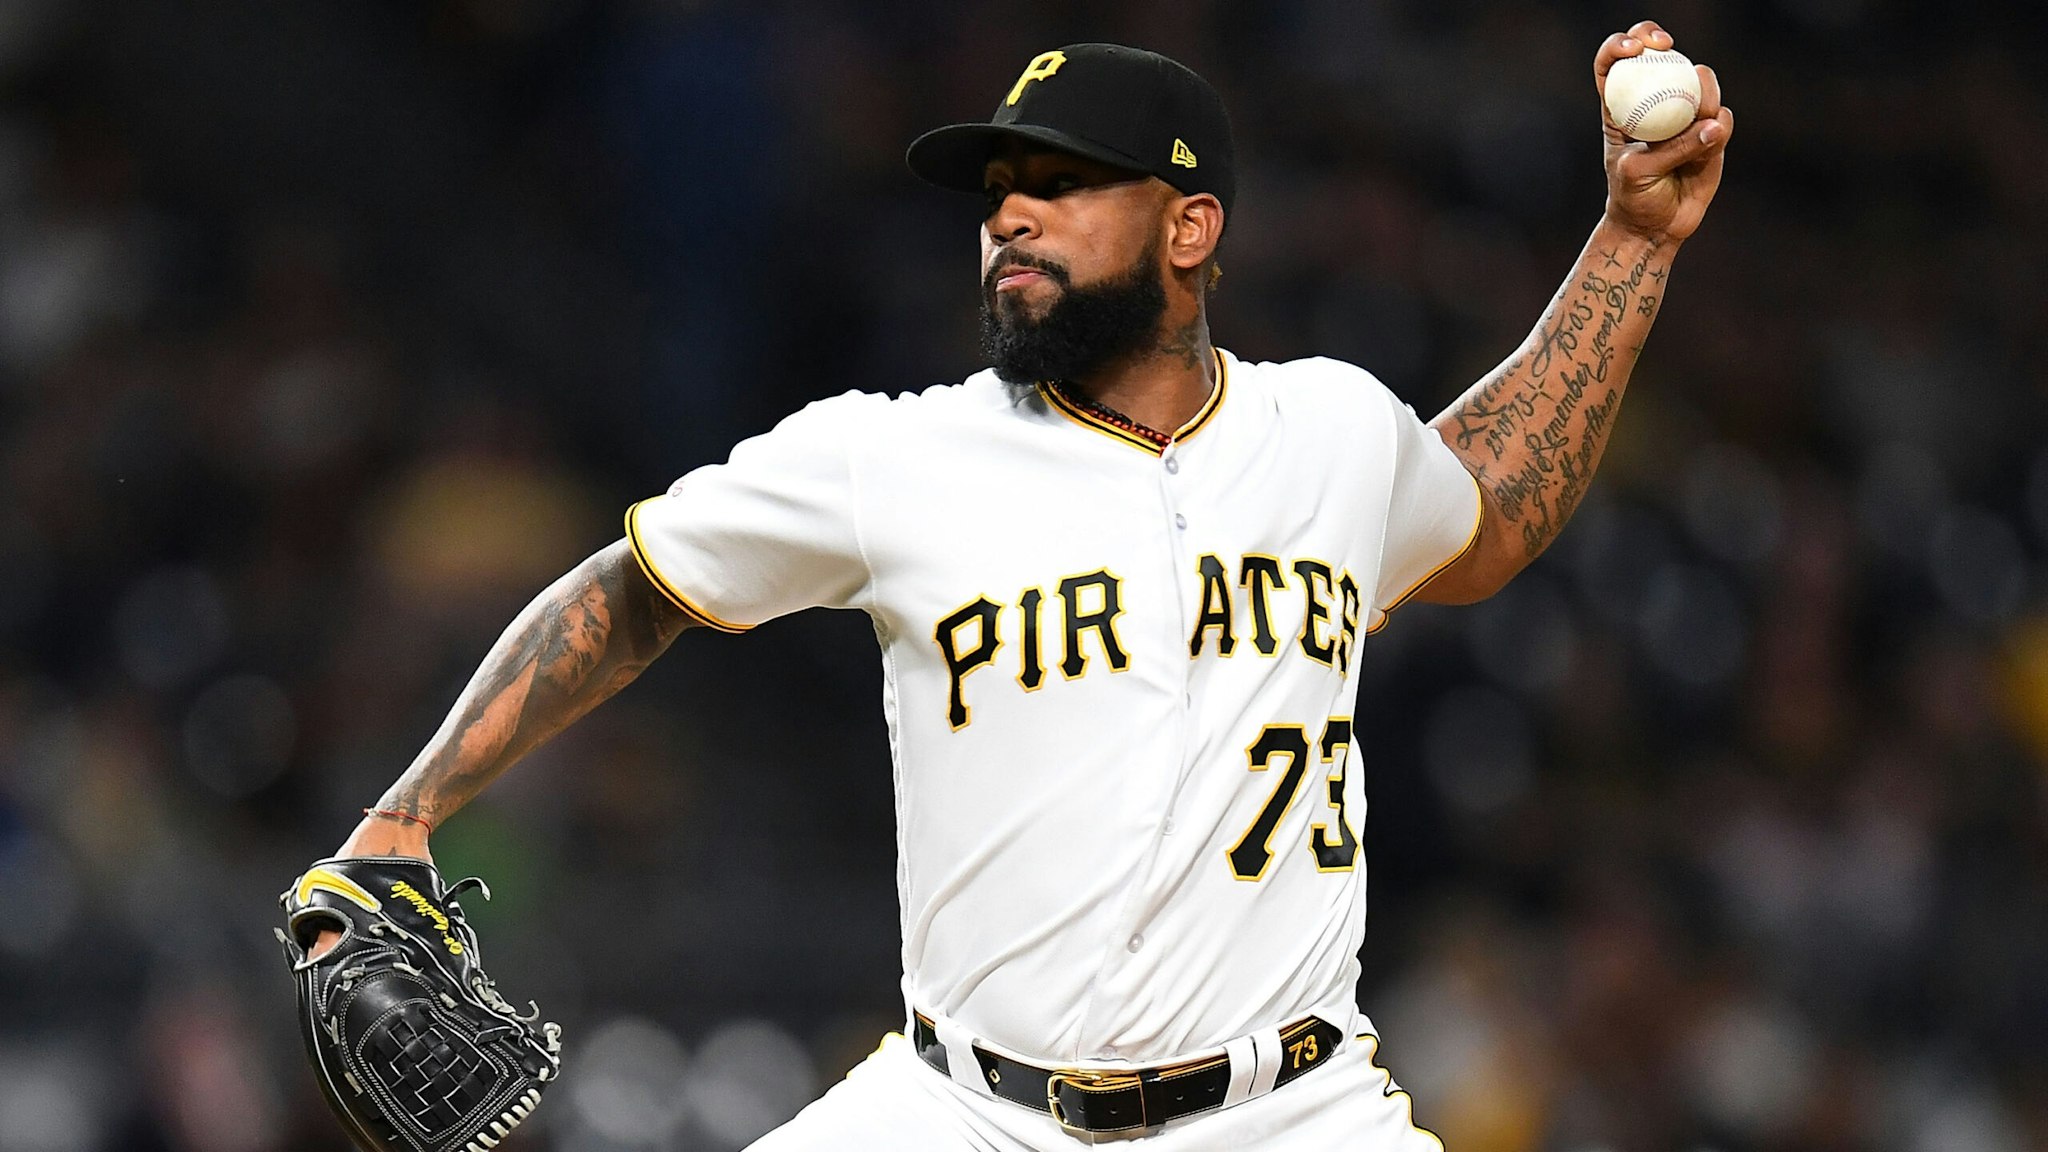 PITTSBURGH, PA - MAY 31: Felipe Vazquez #73 of the Pittsburgh Pirates in action during the game against the Milwaukee Brewers at PNC Park on May 31, 2019 in Pittsburgh, Pennsylvania.